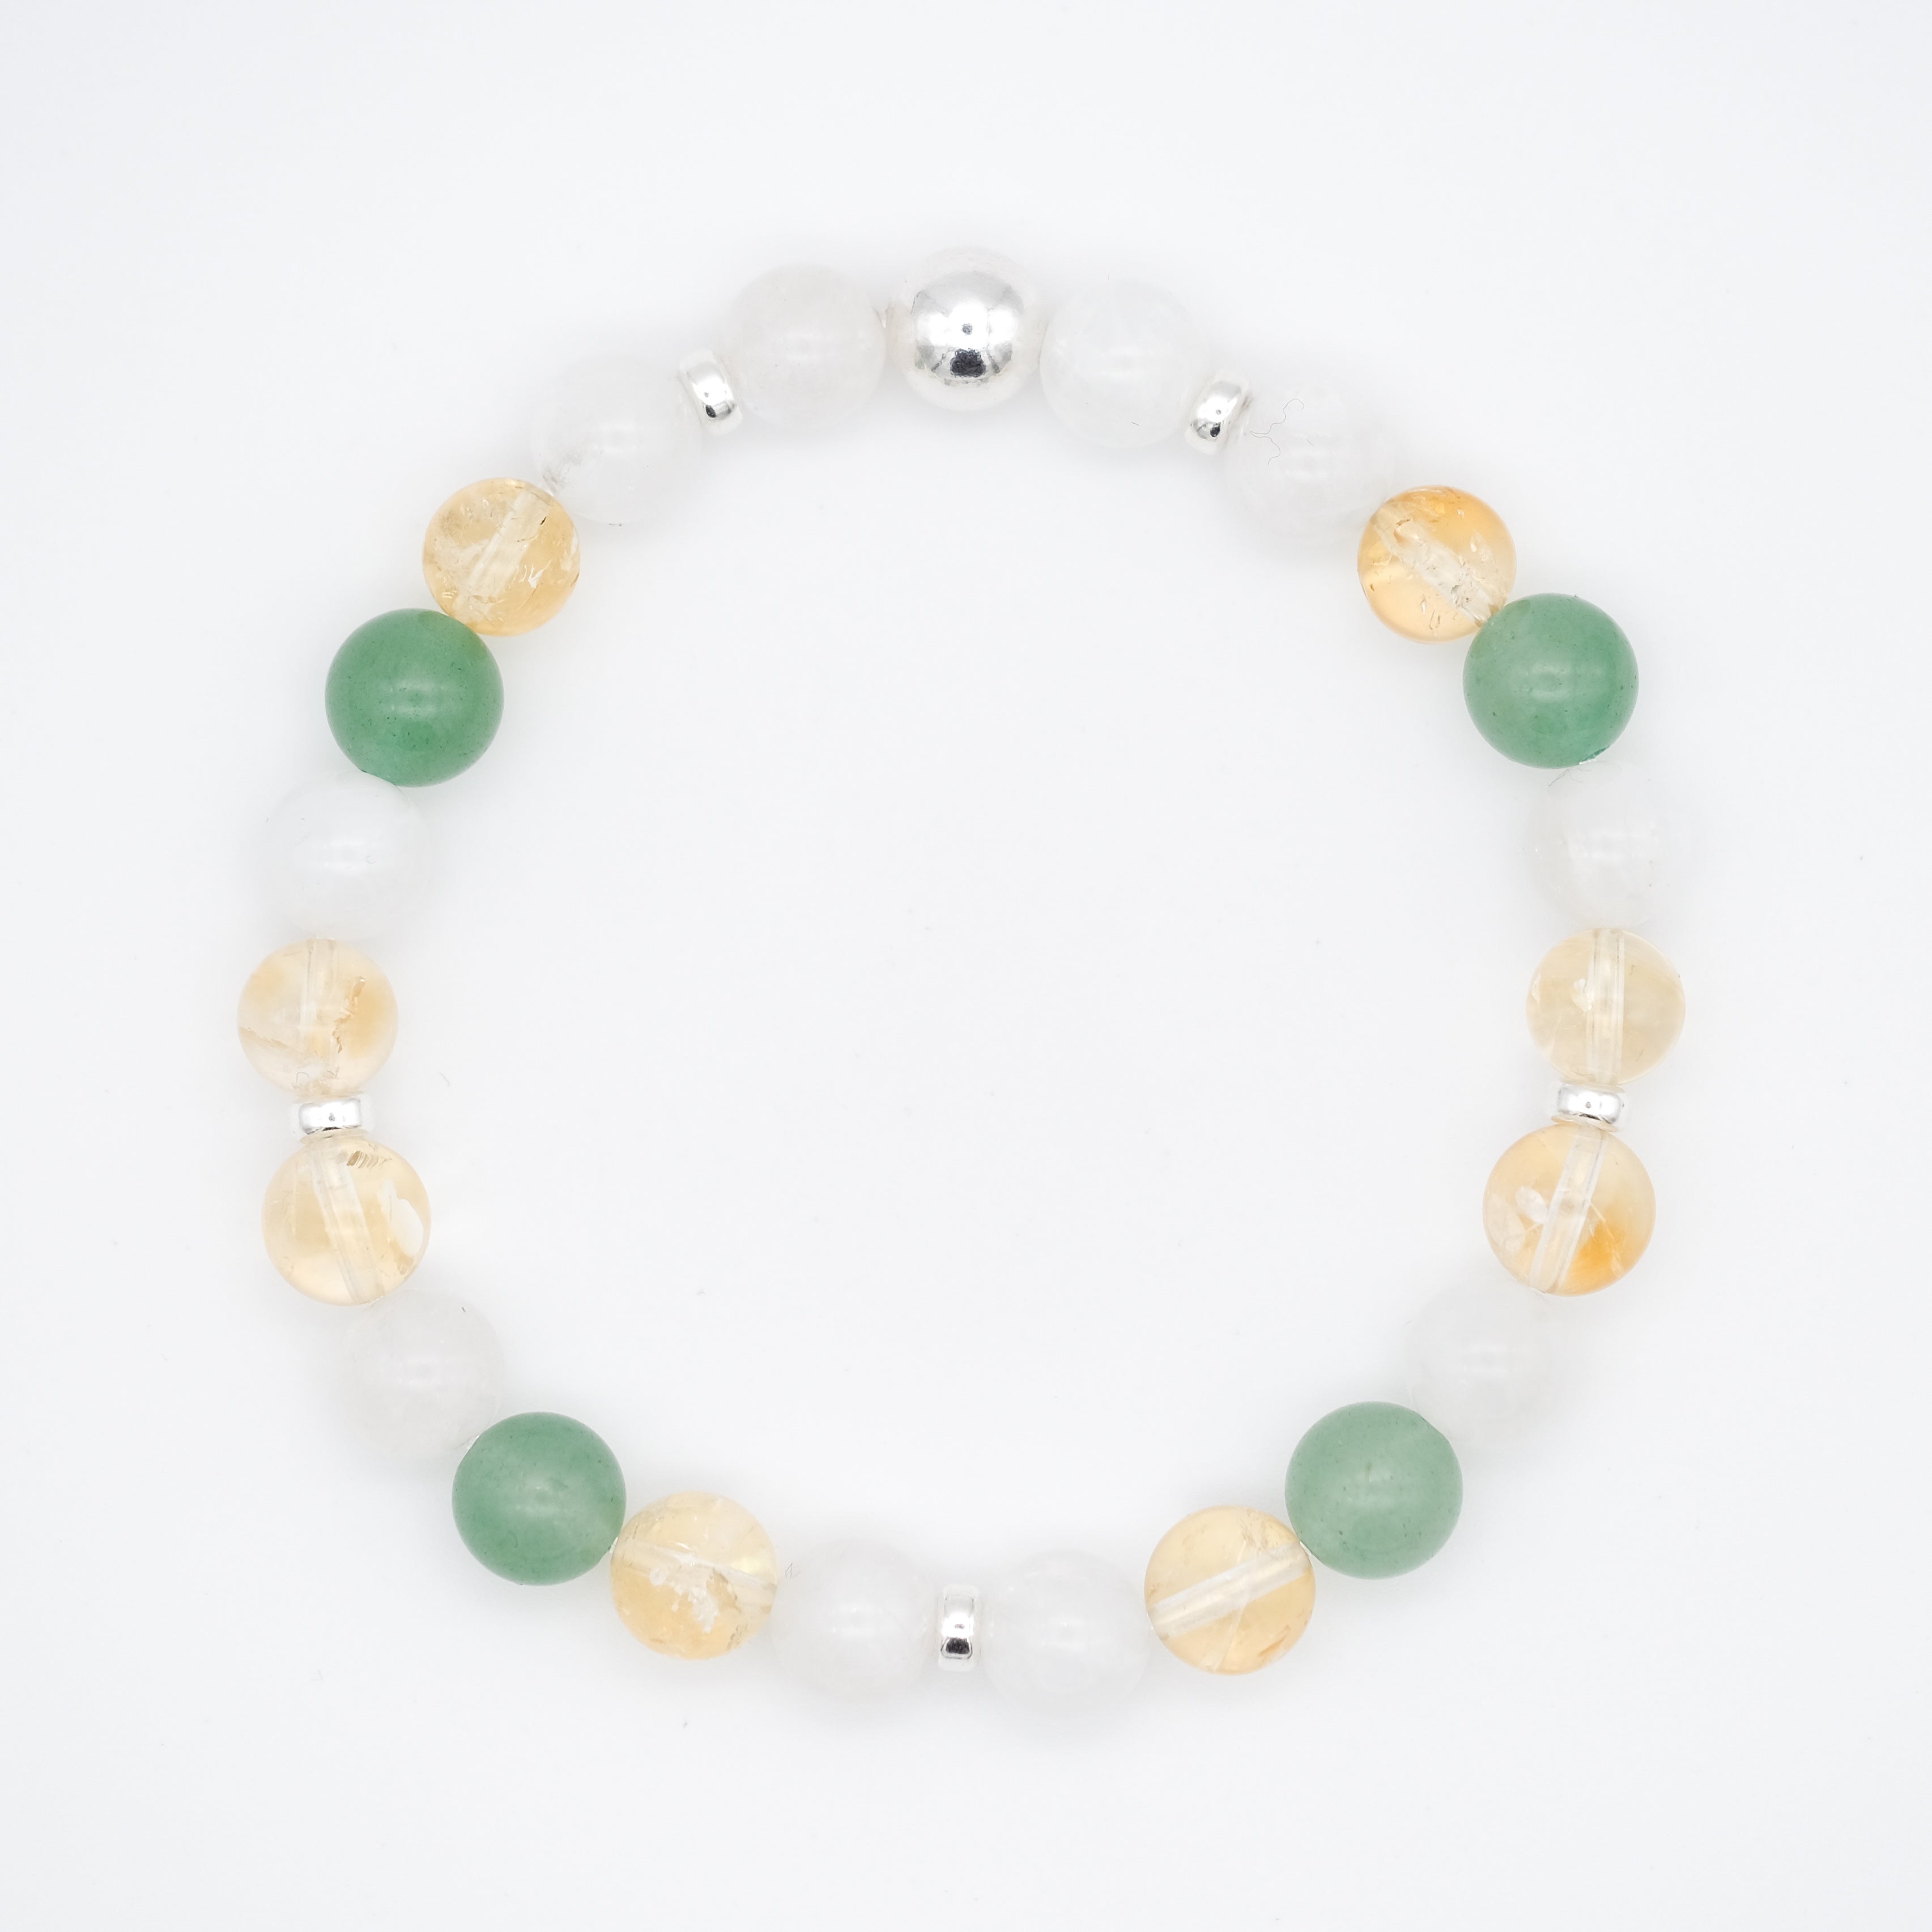 An aventurine, moonstone and citrine gemstone bracelet with silver accessories from above